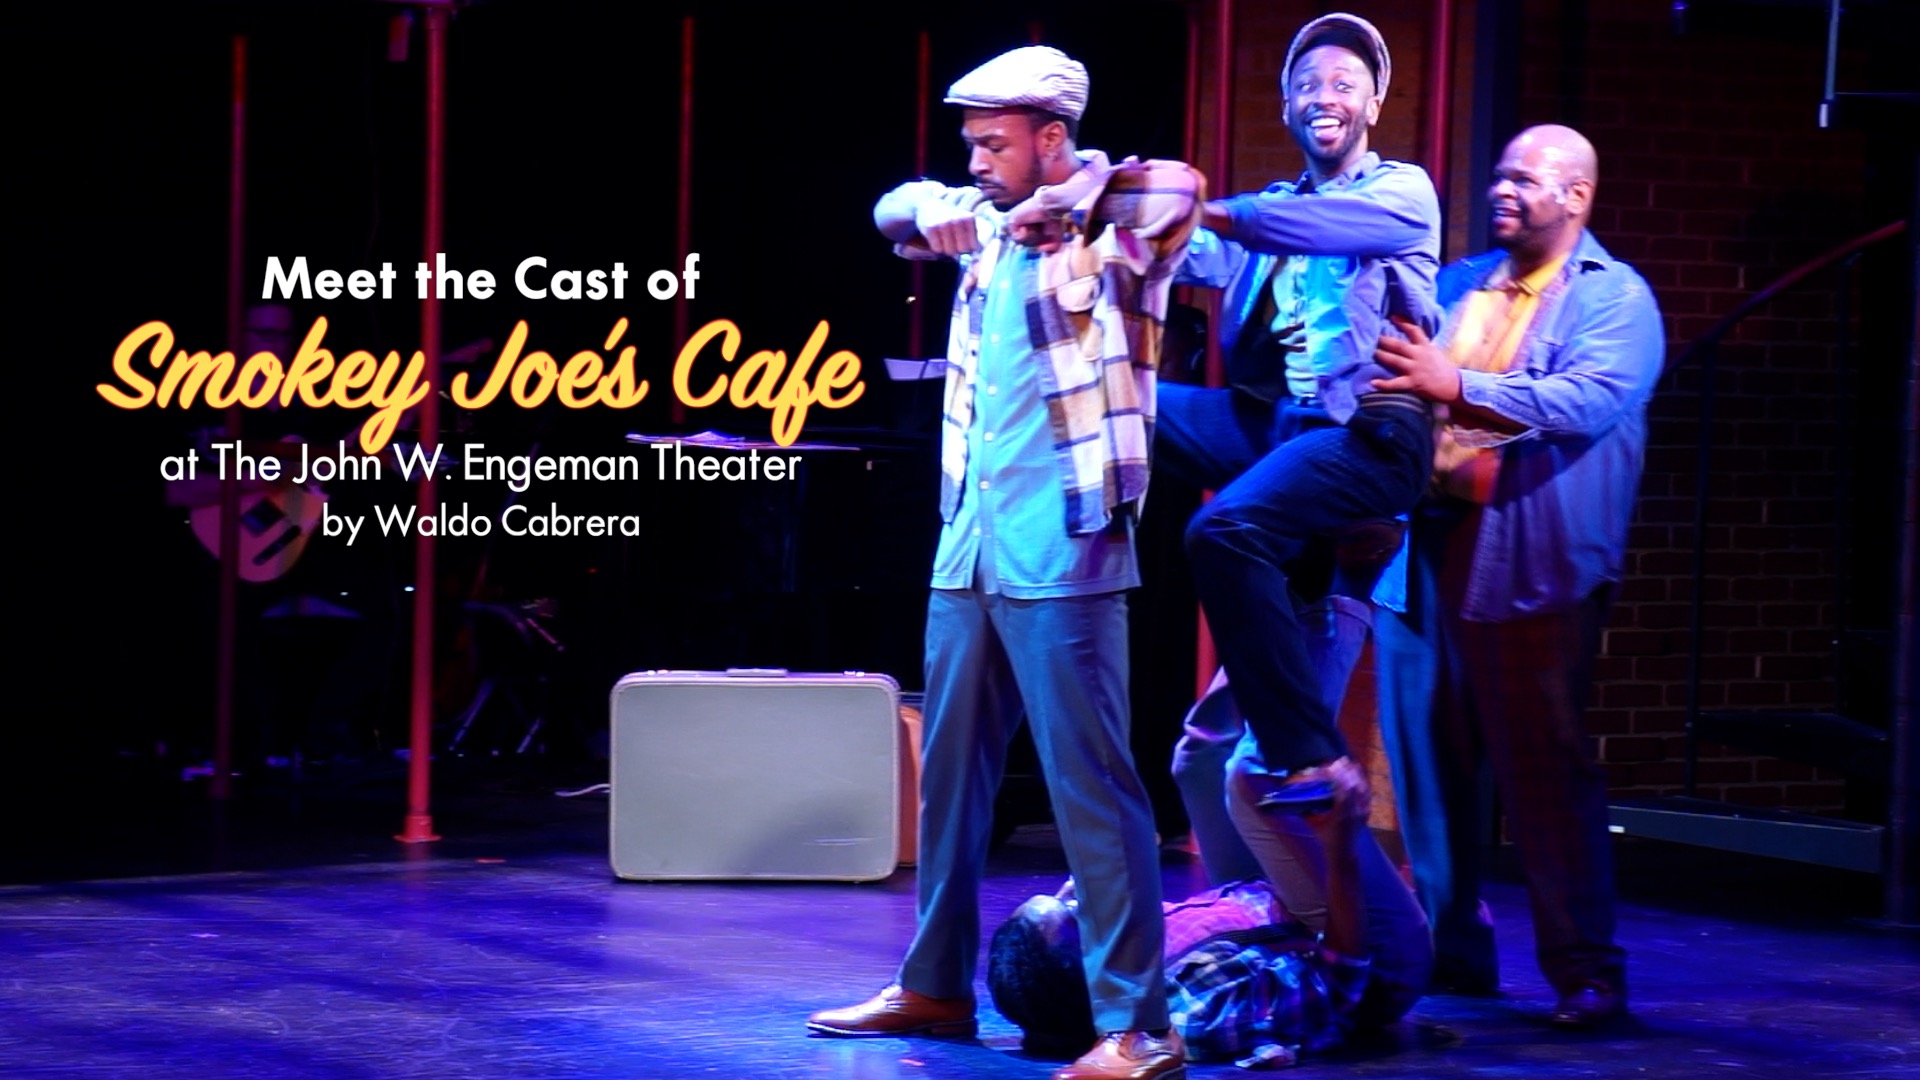 Meet The Cast of Smokey Joes Cafe at The JW Engeman Theater